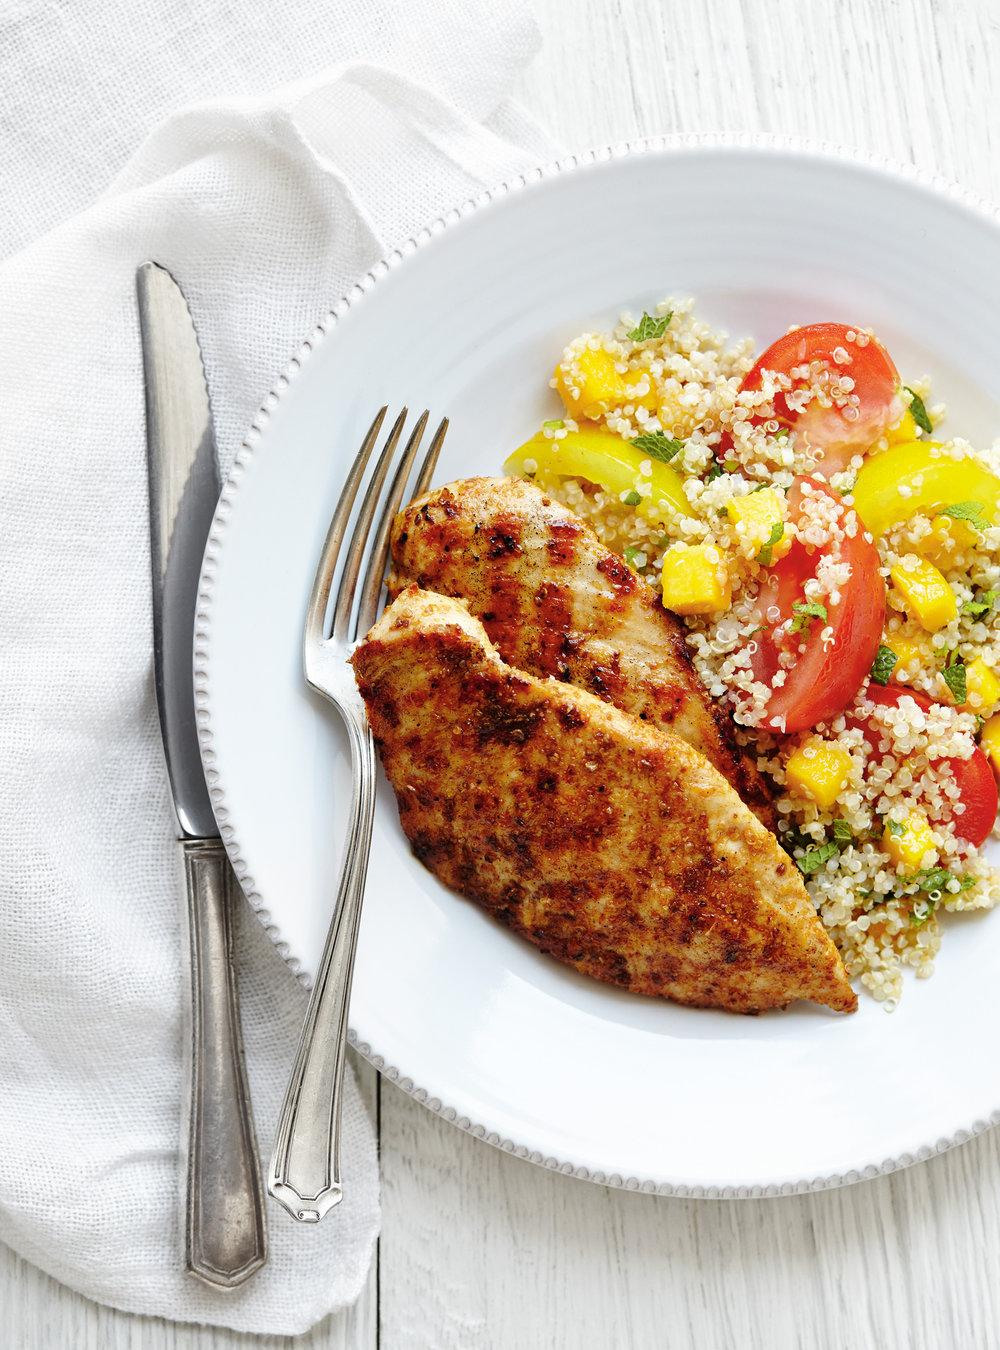 Grilled Chicken with Tomato, Mango and Quinoa Salad